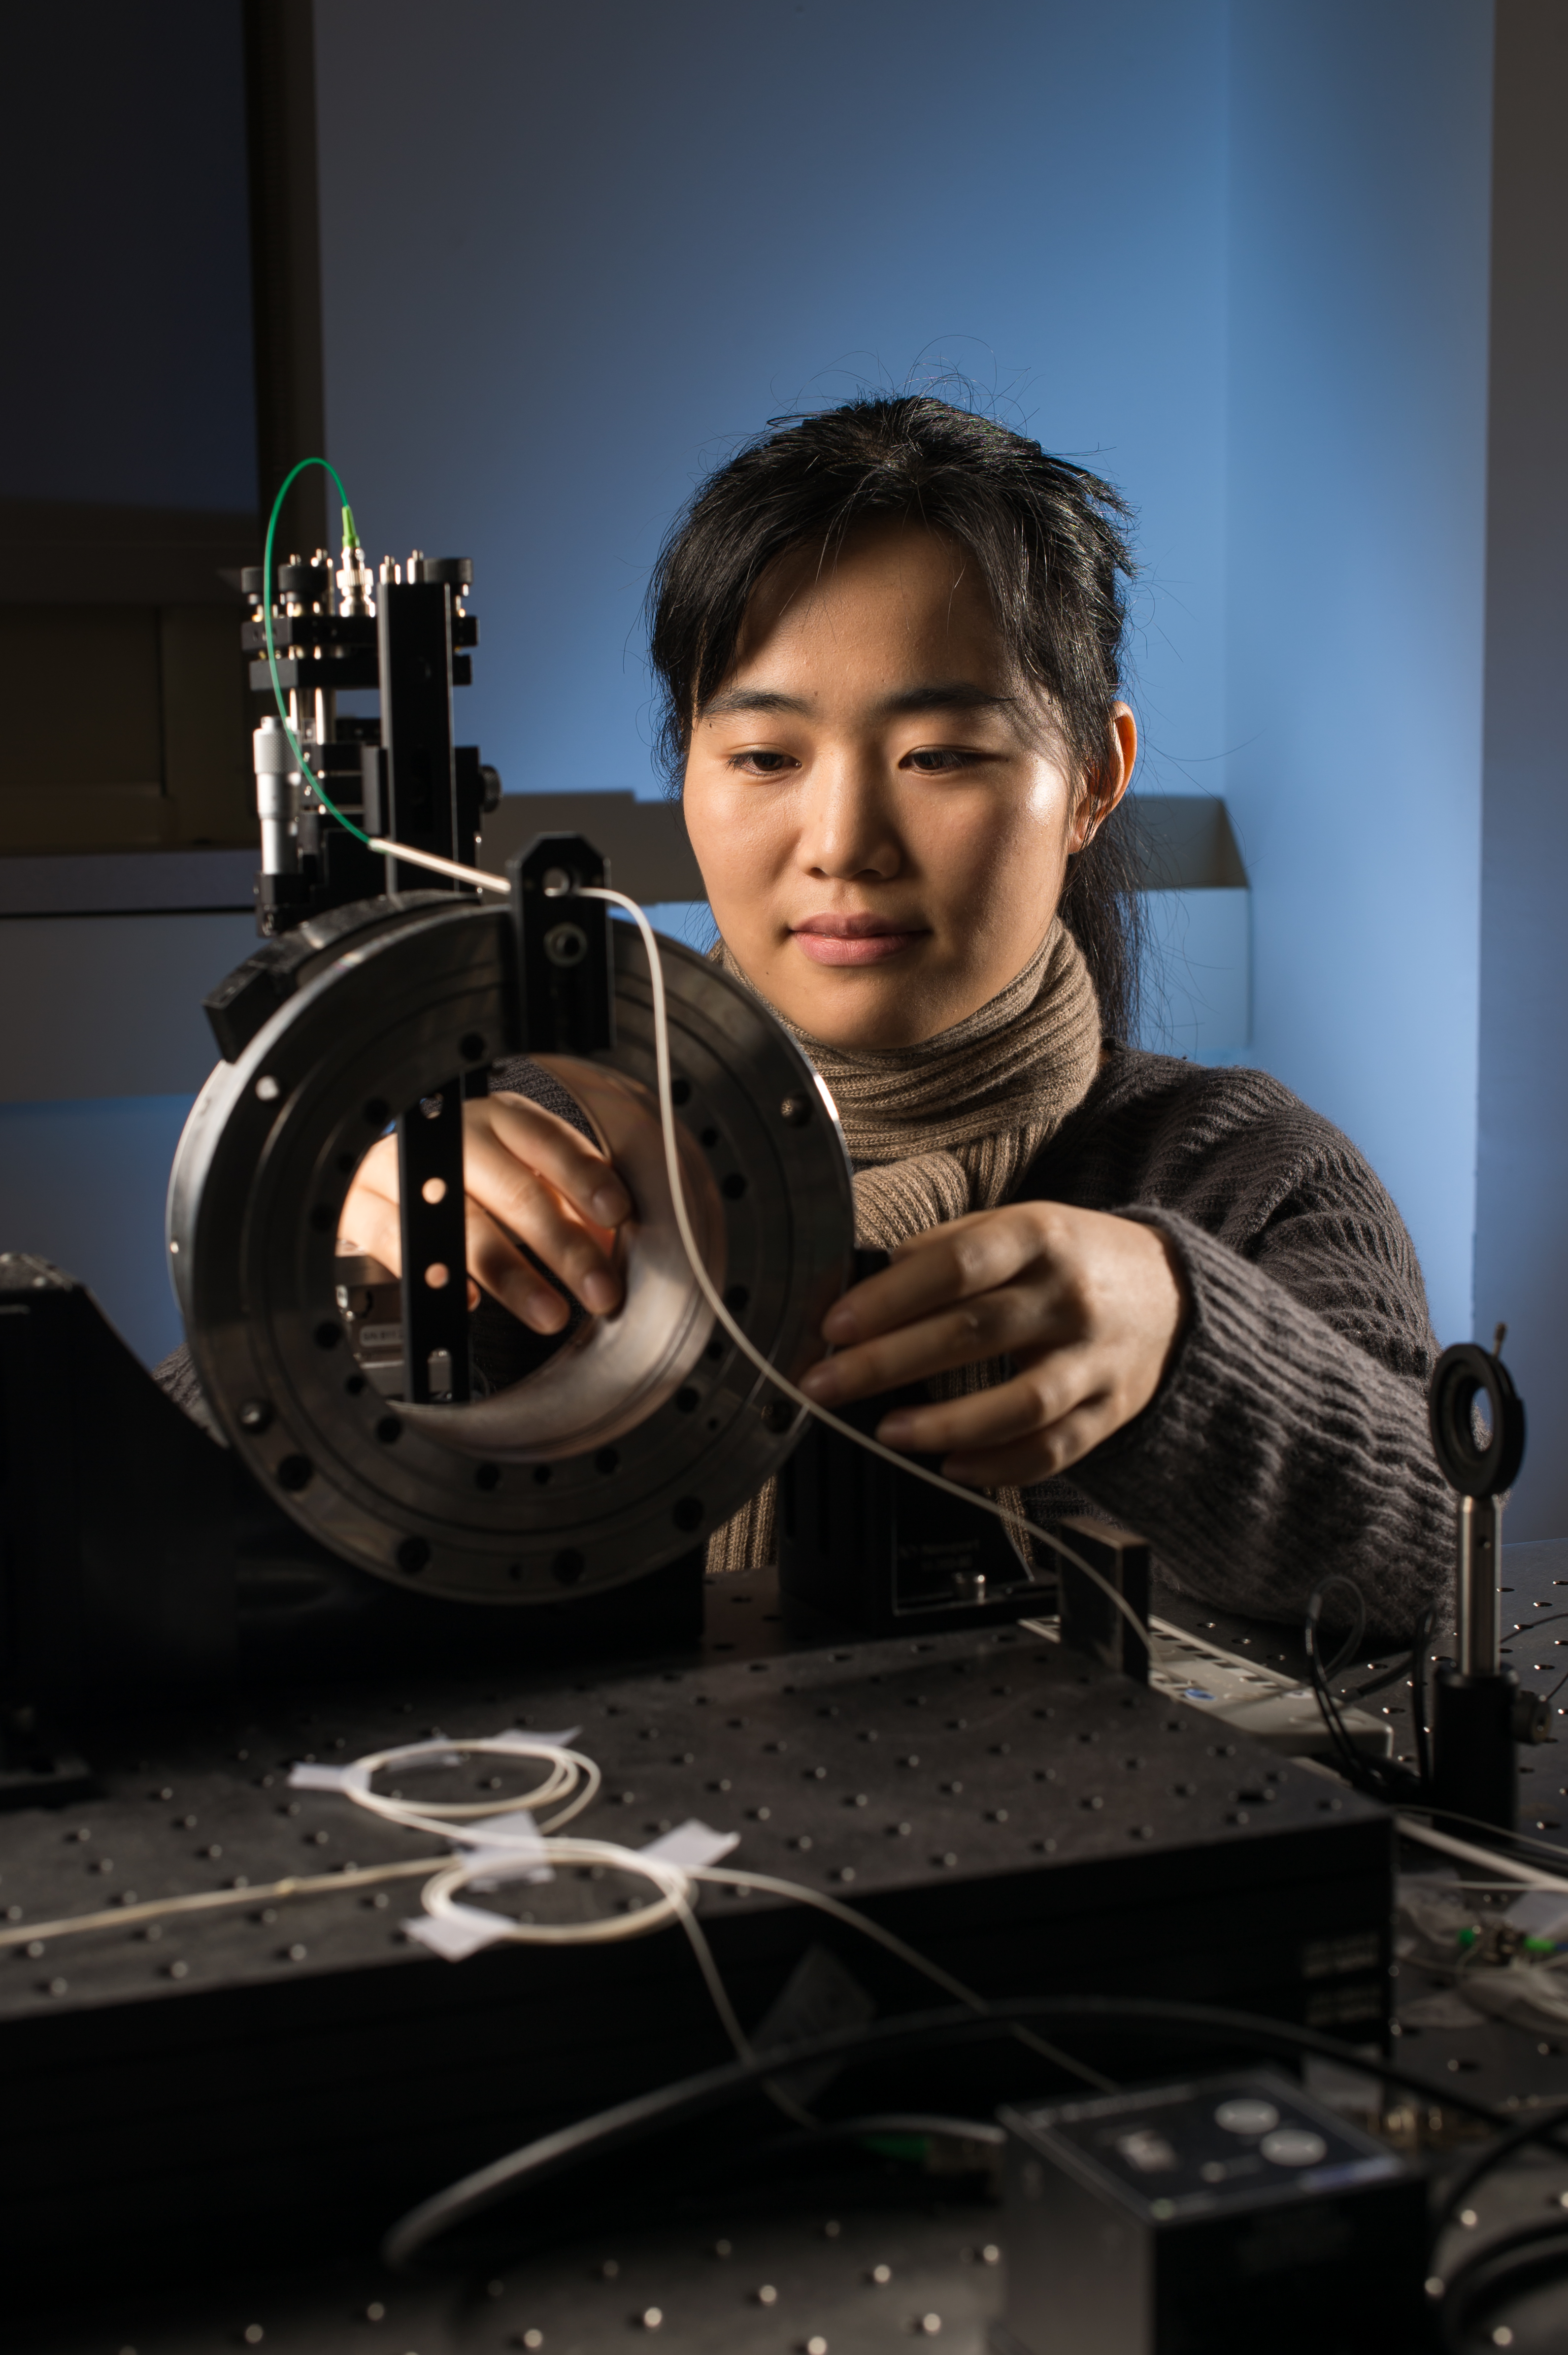 Jianing Yao, University of Rochester PhD student in Optics 2016 (undergrad: Tianjin University, China) adjusts an angular scan optical coherence tomography (OCT) system that was developed to perform 3D visualization and nondestructive testing of gradient refractive index lenses and preforms with high curvatures, during a session in her lab in Goergen Hall February 11, 2015.  The precision metrology enabled by OCT assists in guiding the evolution of the manufacturing process.  // photo by J. Adam Fenster / University of Rochester